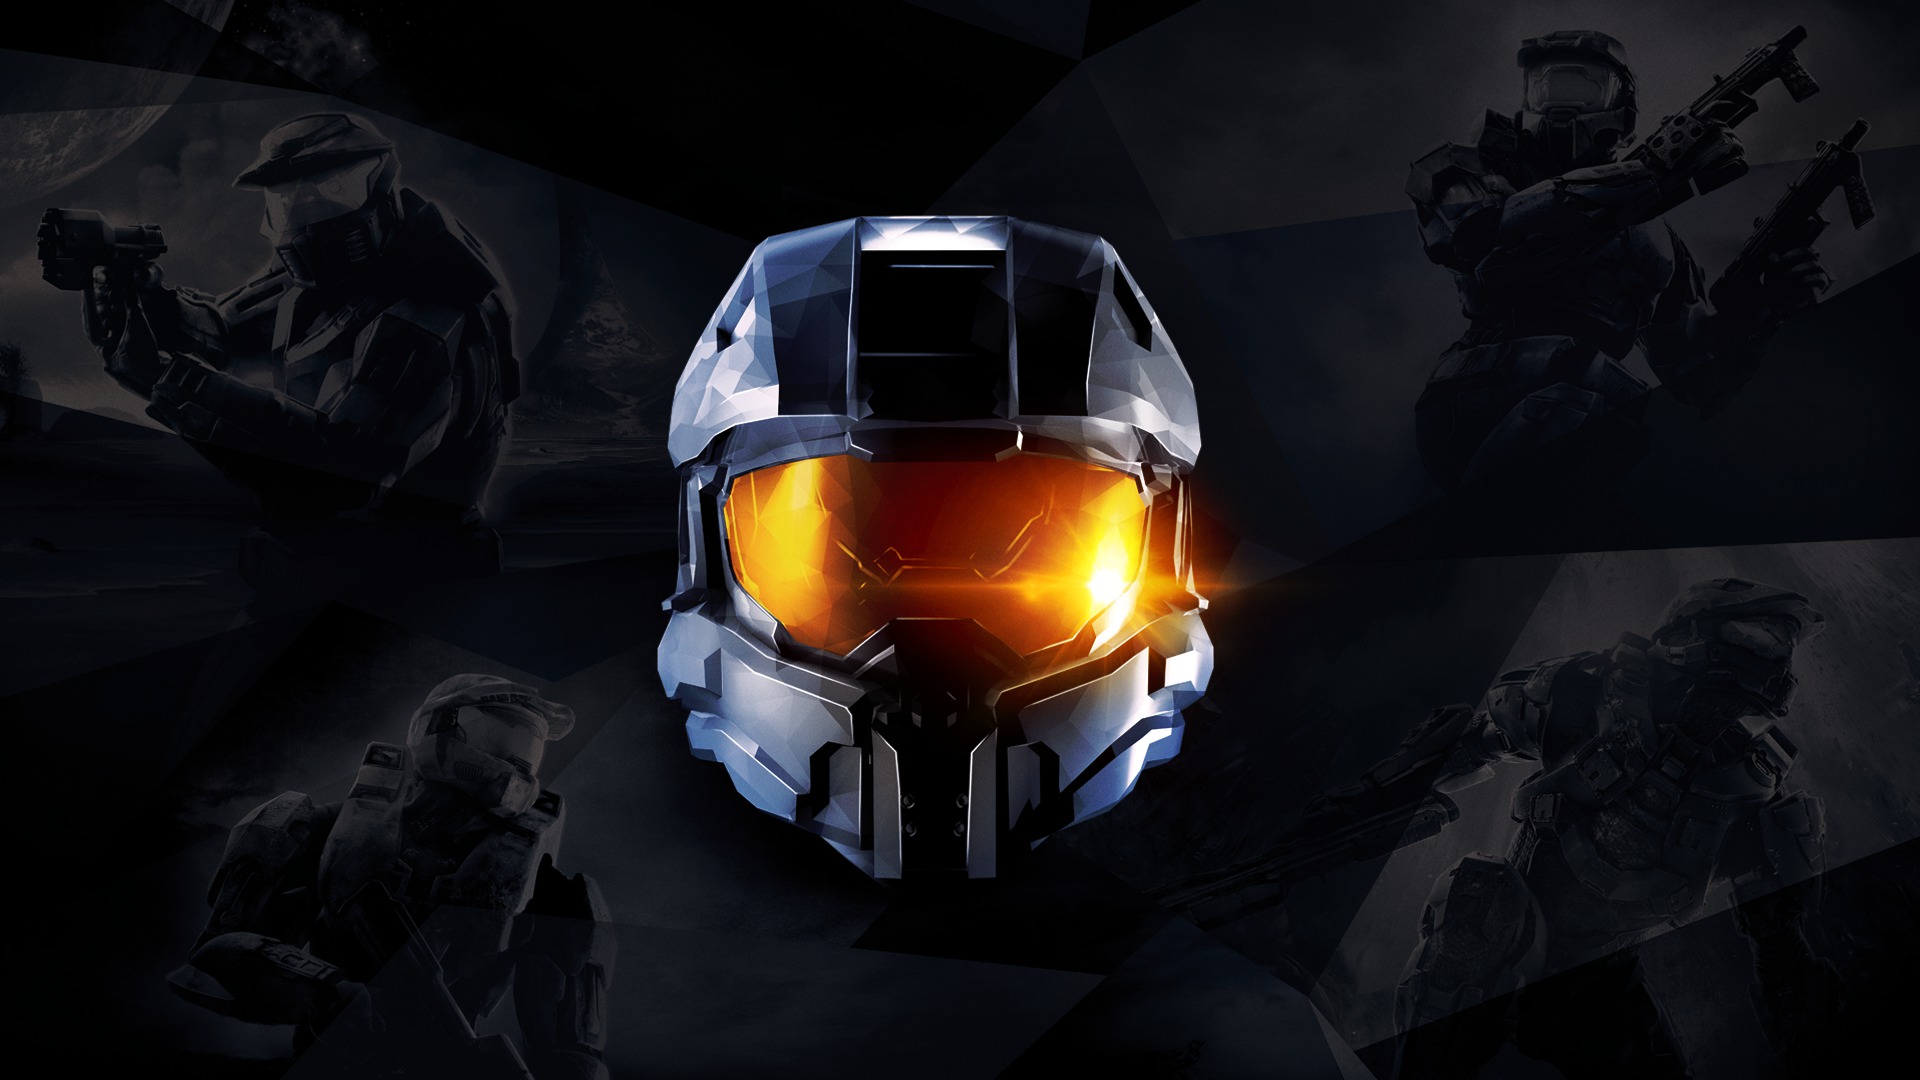 Halo The Master Chief Collection Steam Achievements